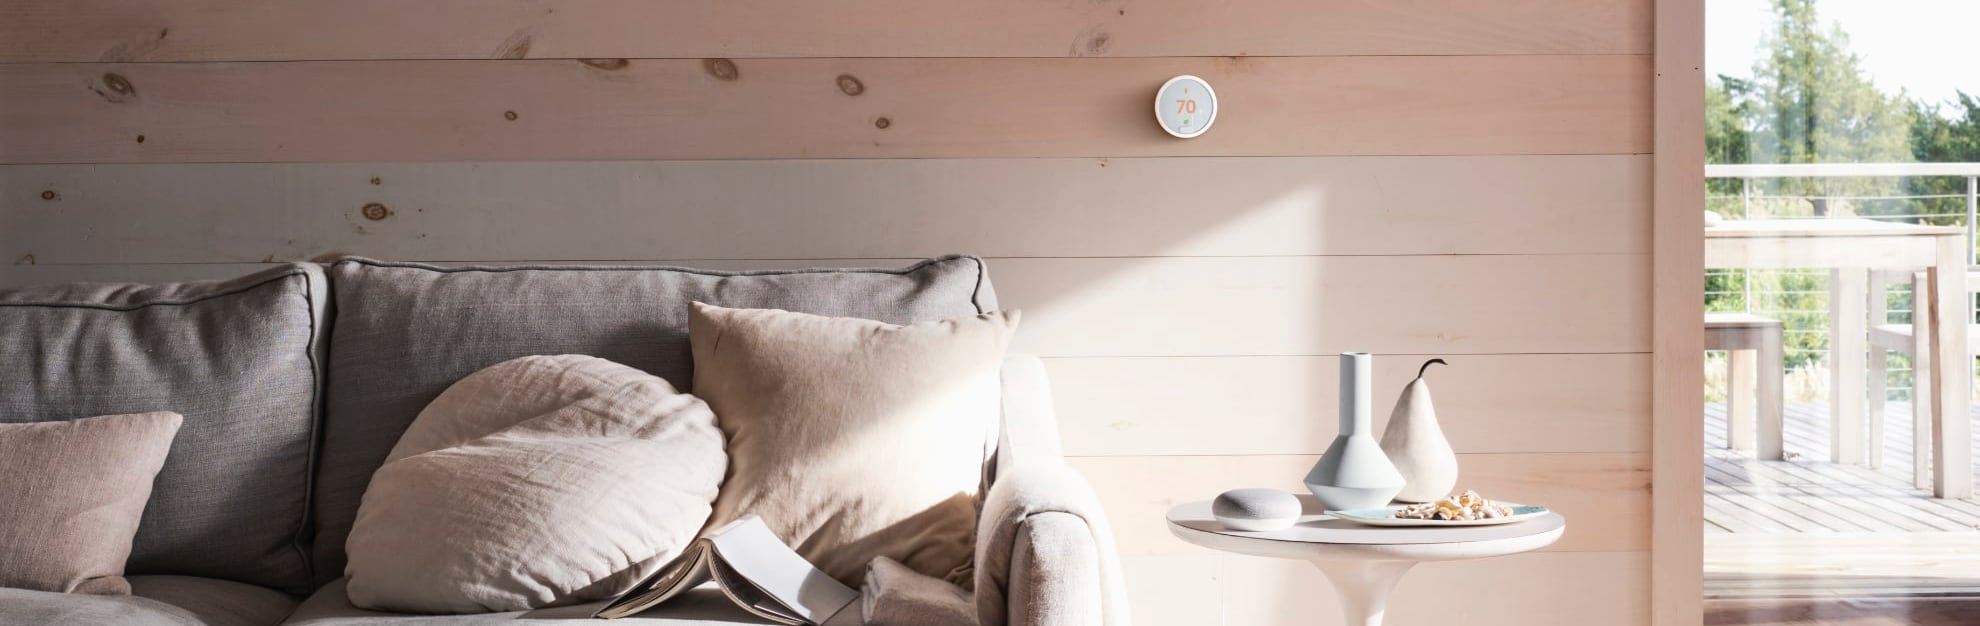 Vivint Home Automation in Roanoke